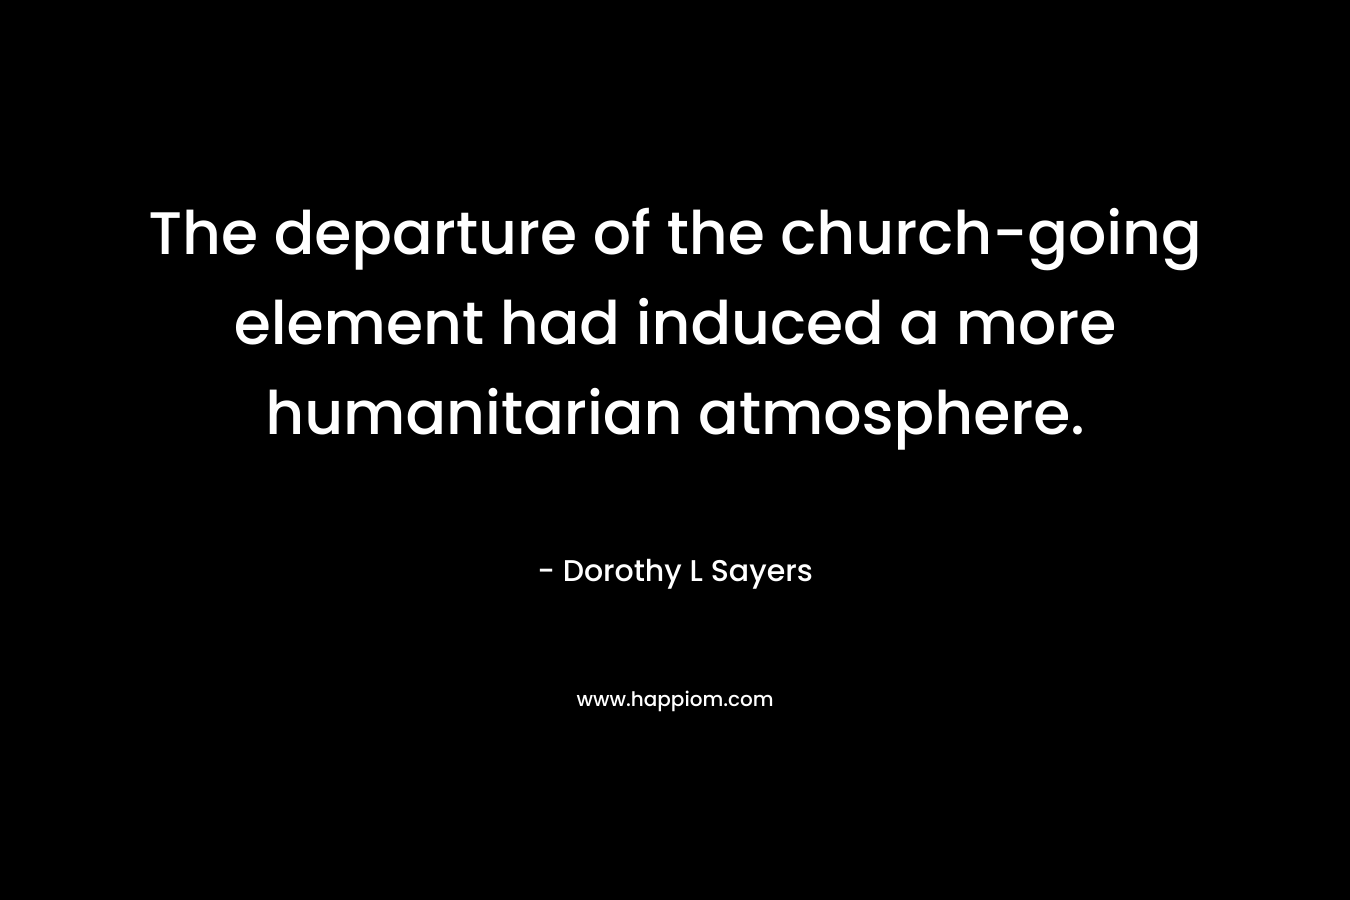 The departure of the church-going element had induced a more humanitarian atmosphere.